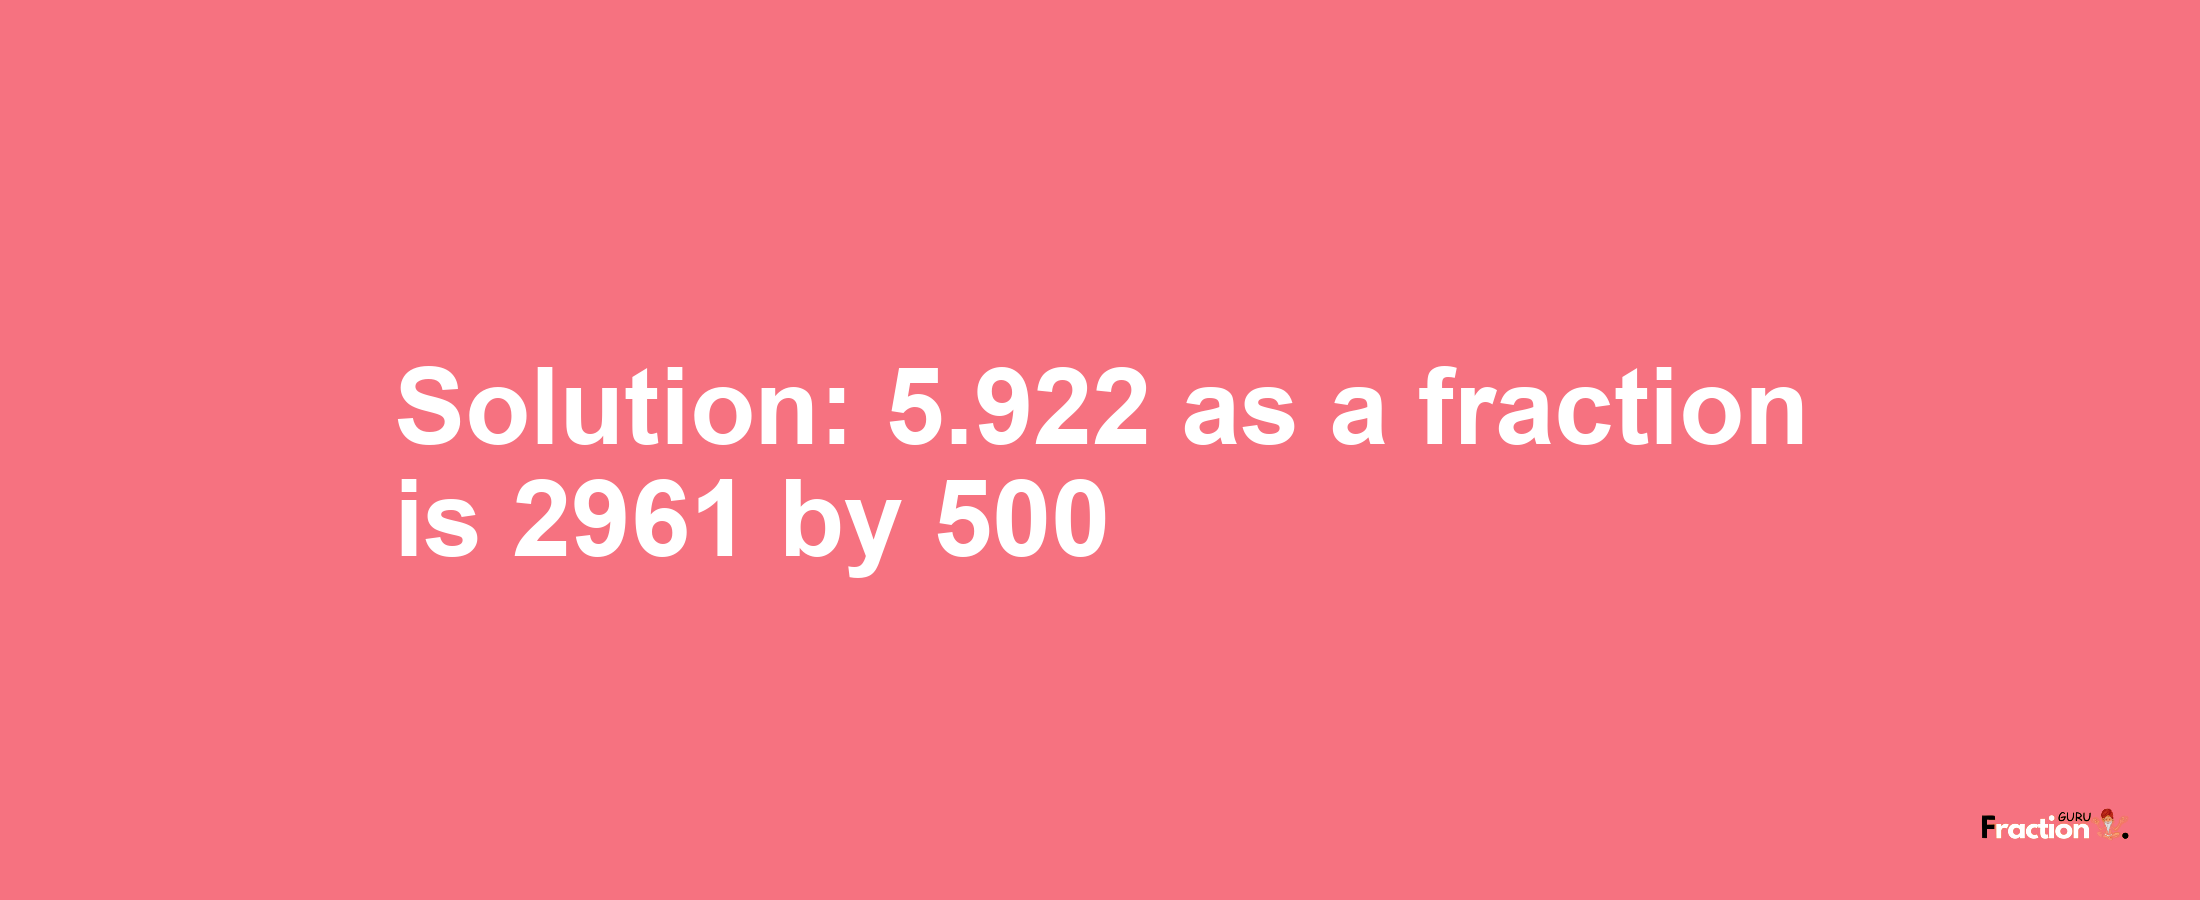 Solution:5.922 as a fraction is 2961/500